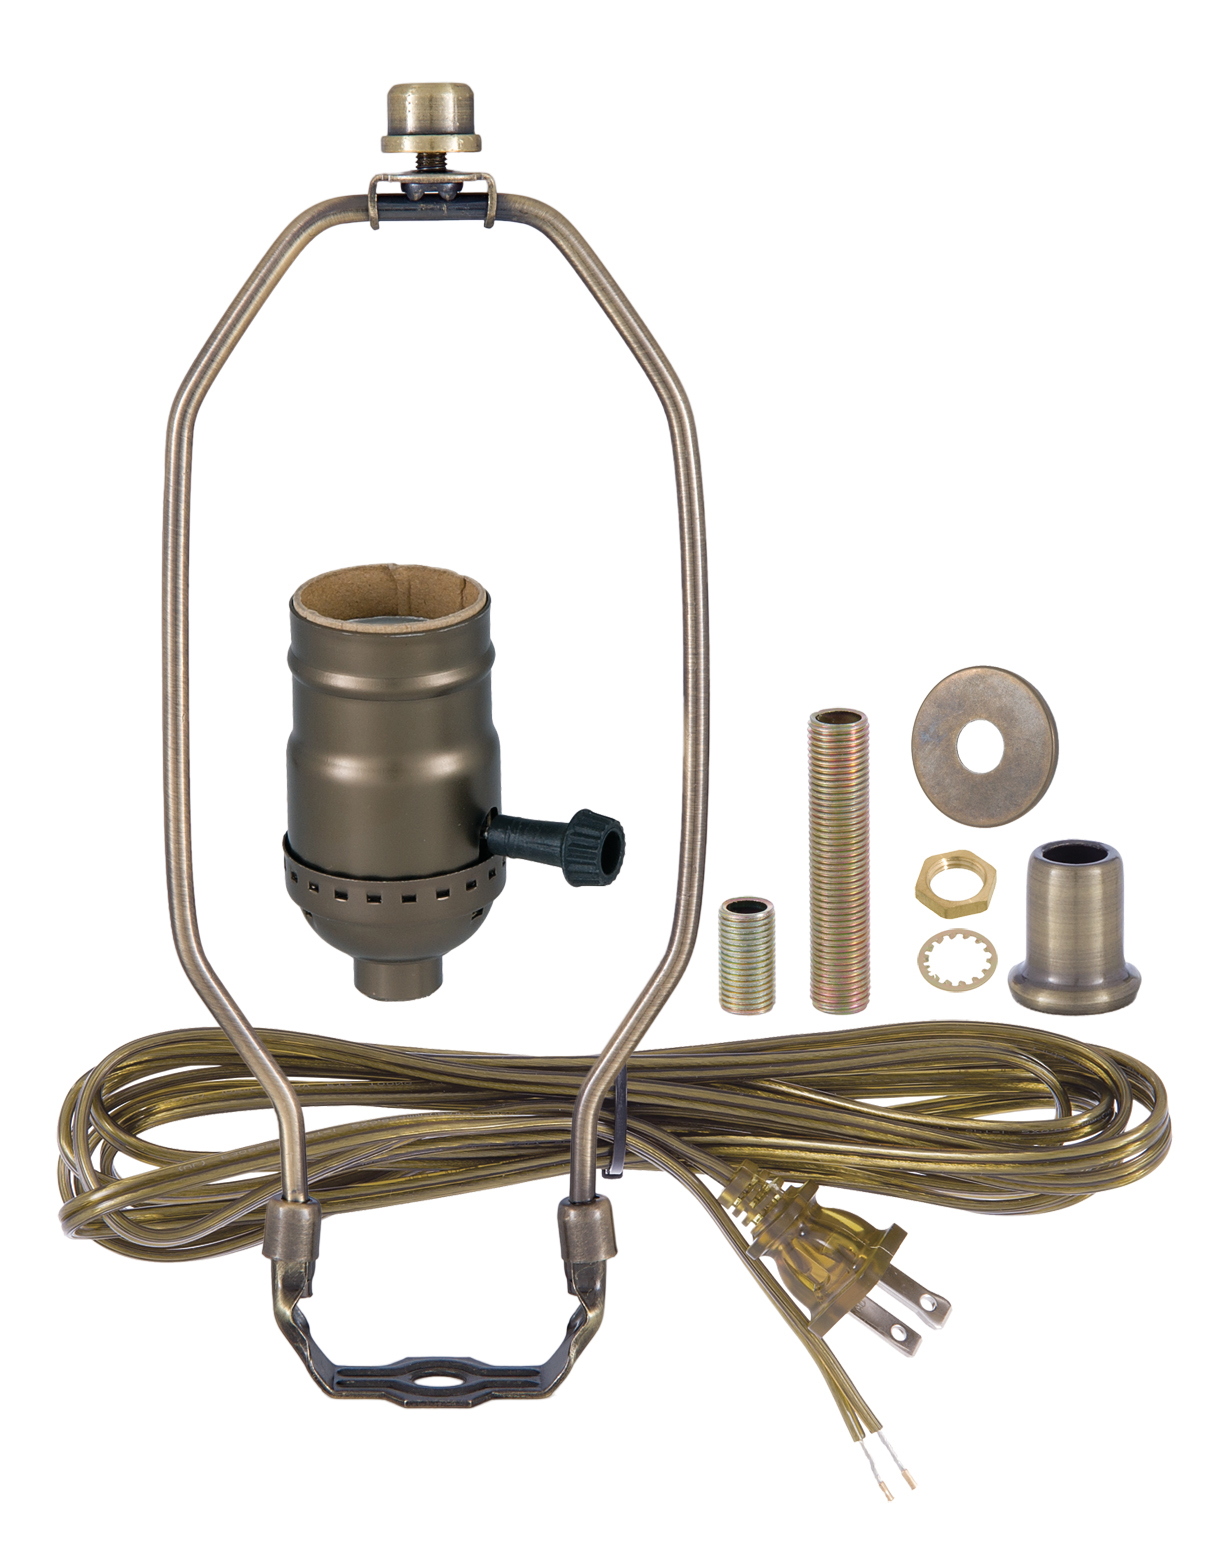 B&P Lamp® Antique Brass Finish Table Lamp Wiring Kit with a 10 Inch Harp and 3-Way Socket - image 1 of 4